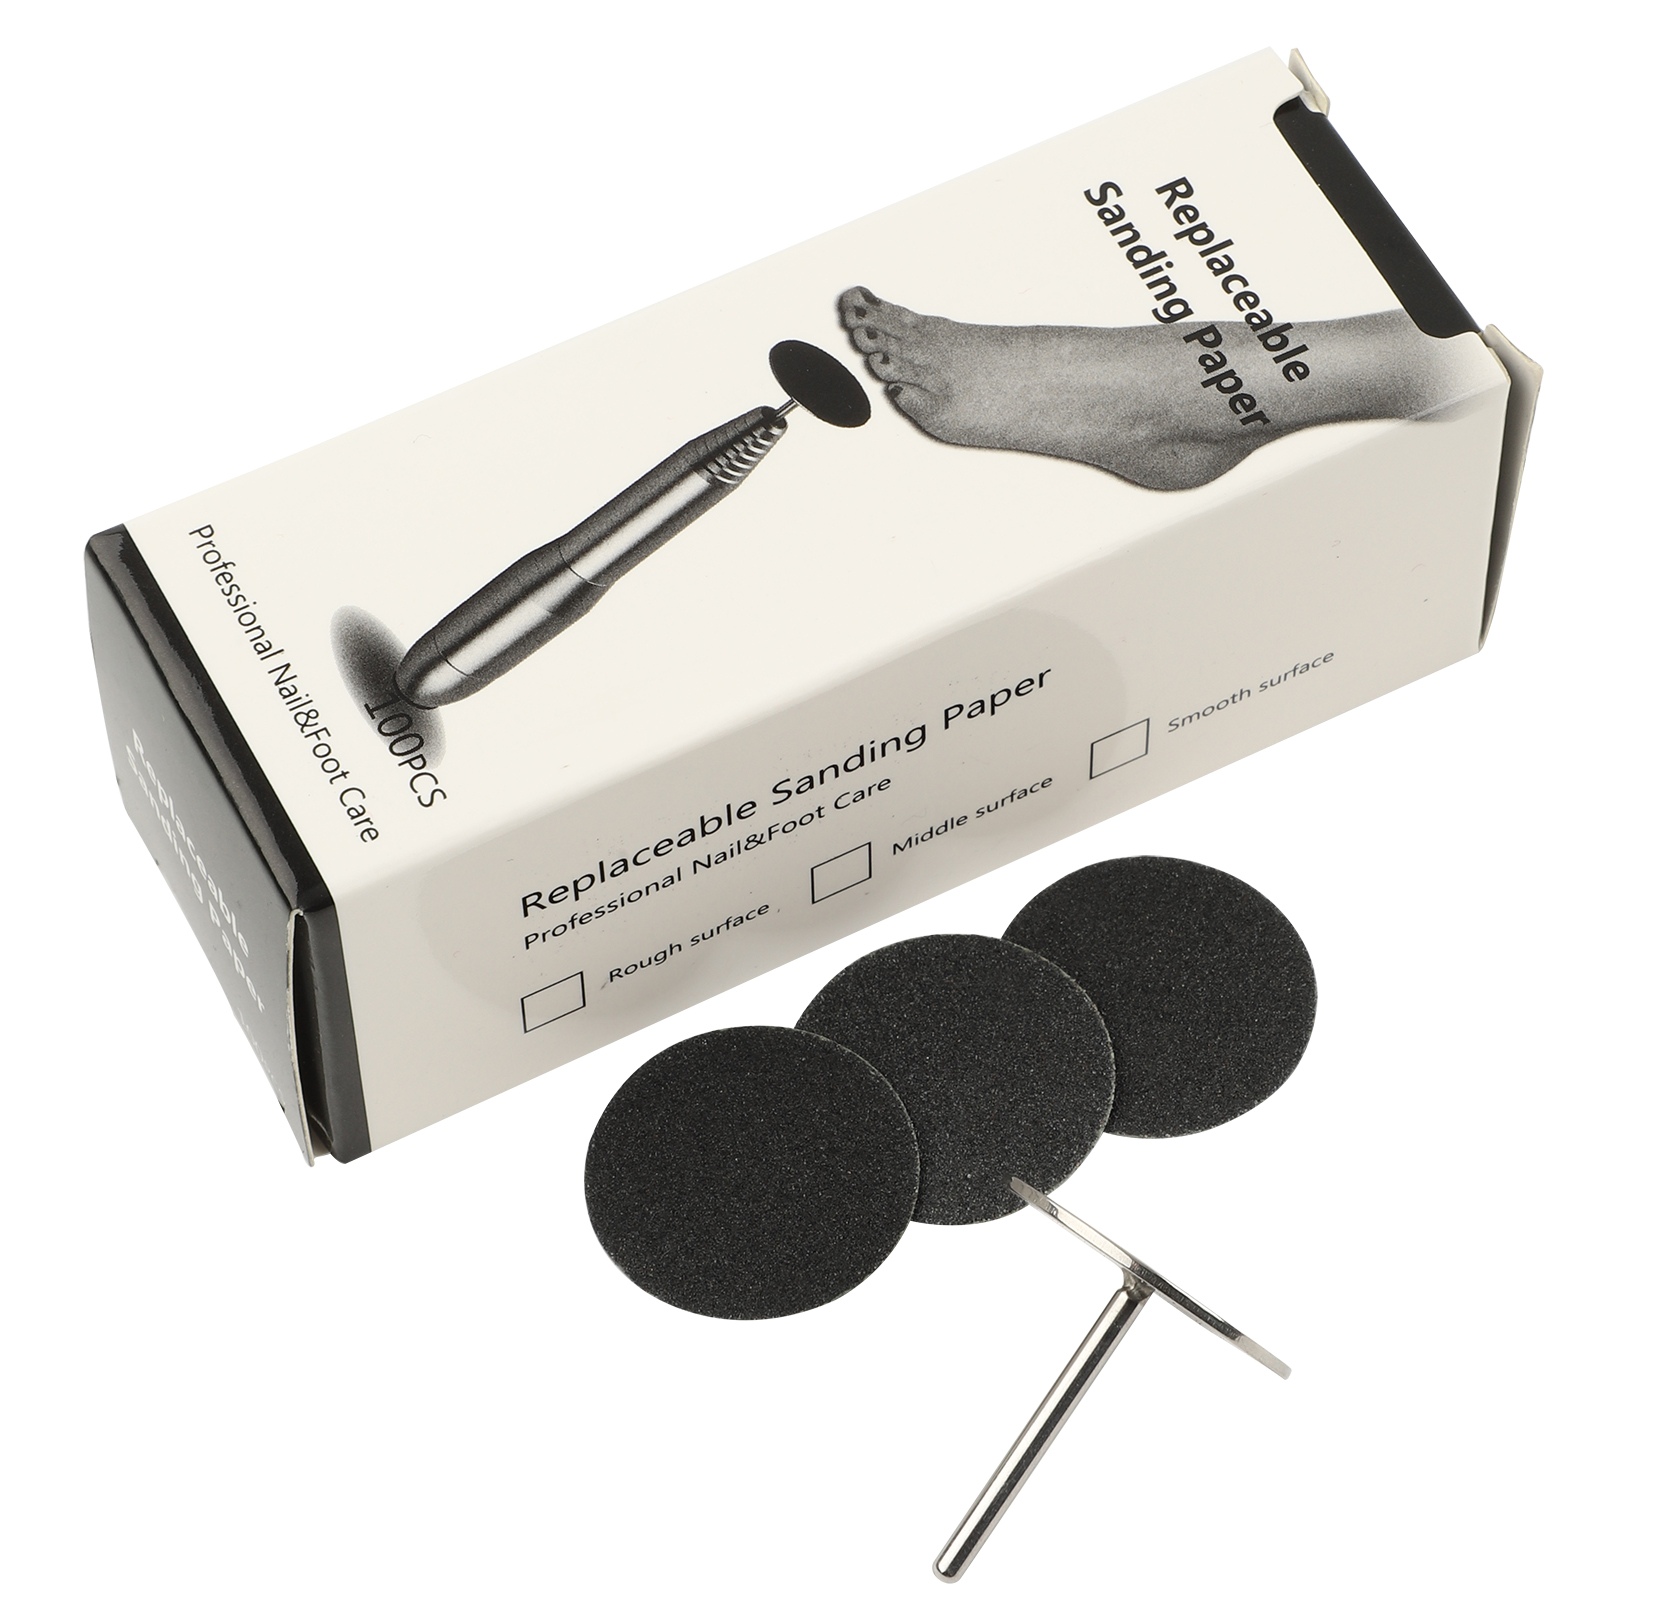 replaceable sanding paper dia 35mm and mandrel for Pedicure to remove dead skin Featured Image